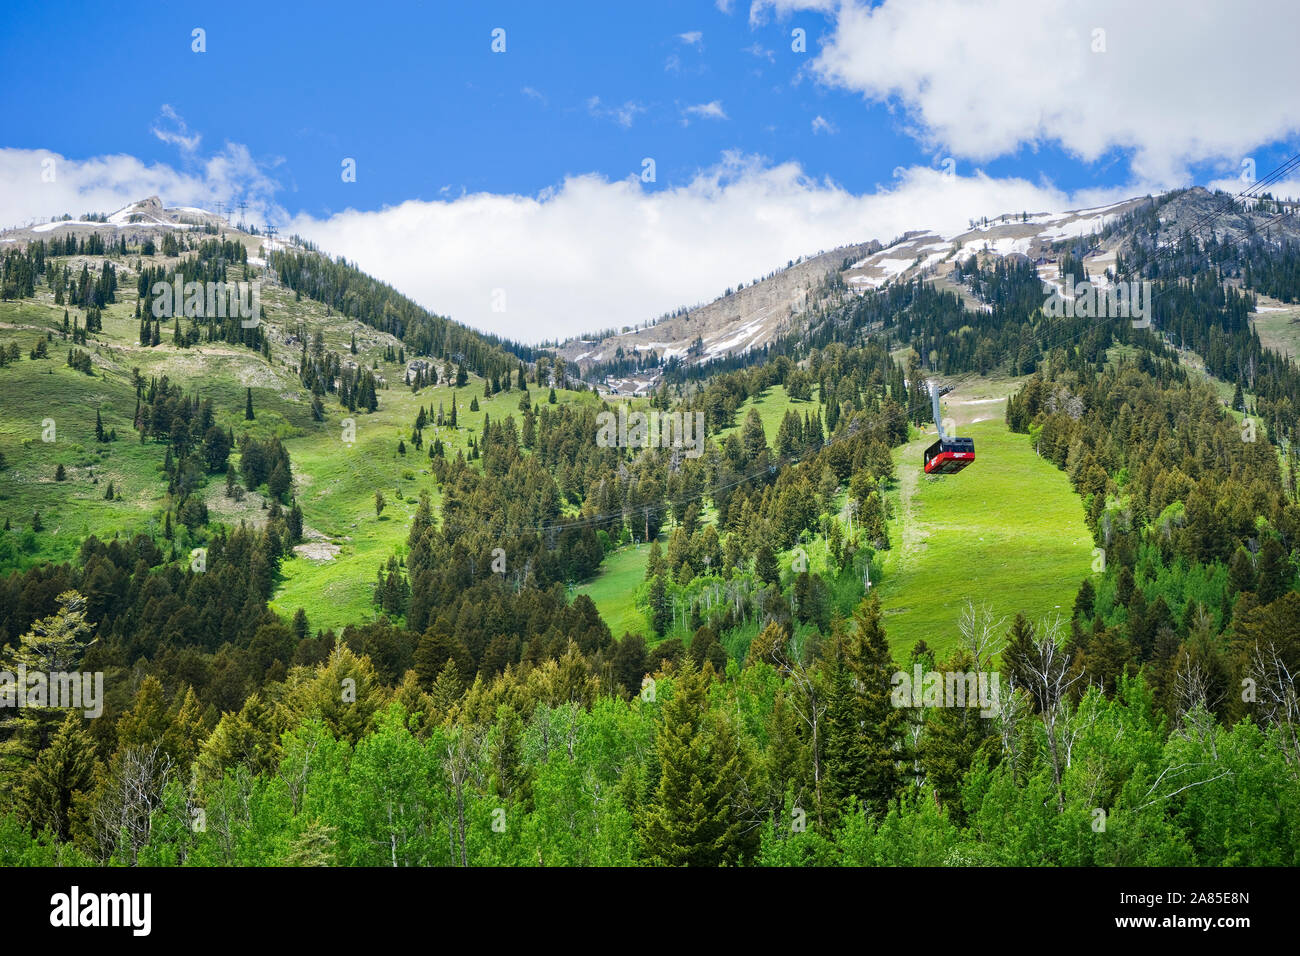 Aerial Tram at the Jackson Hole Mountain Resort Stock Photo